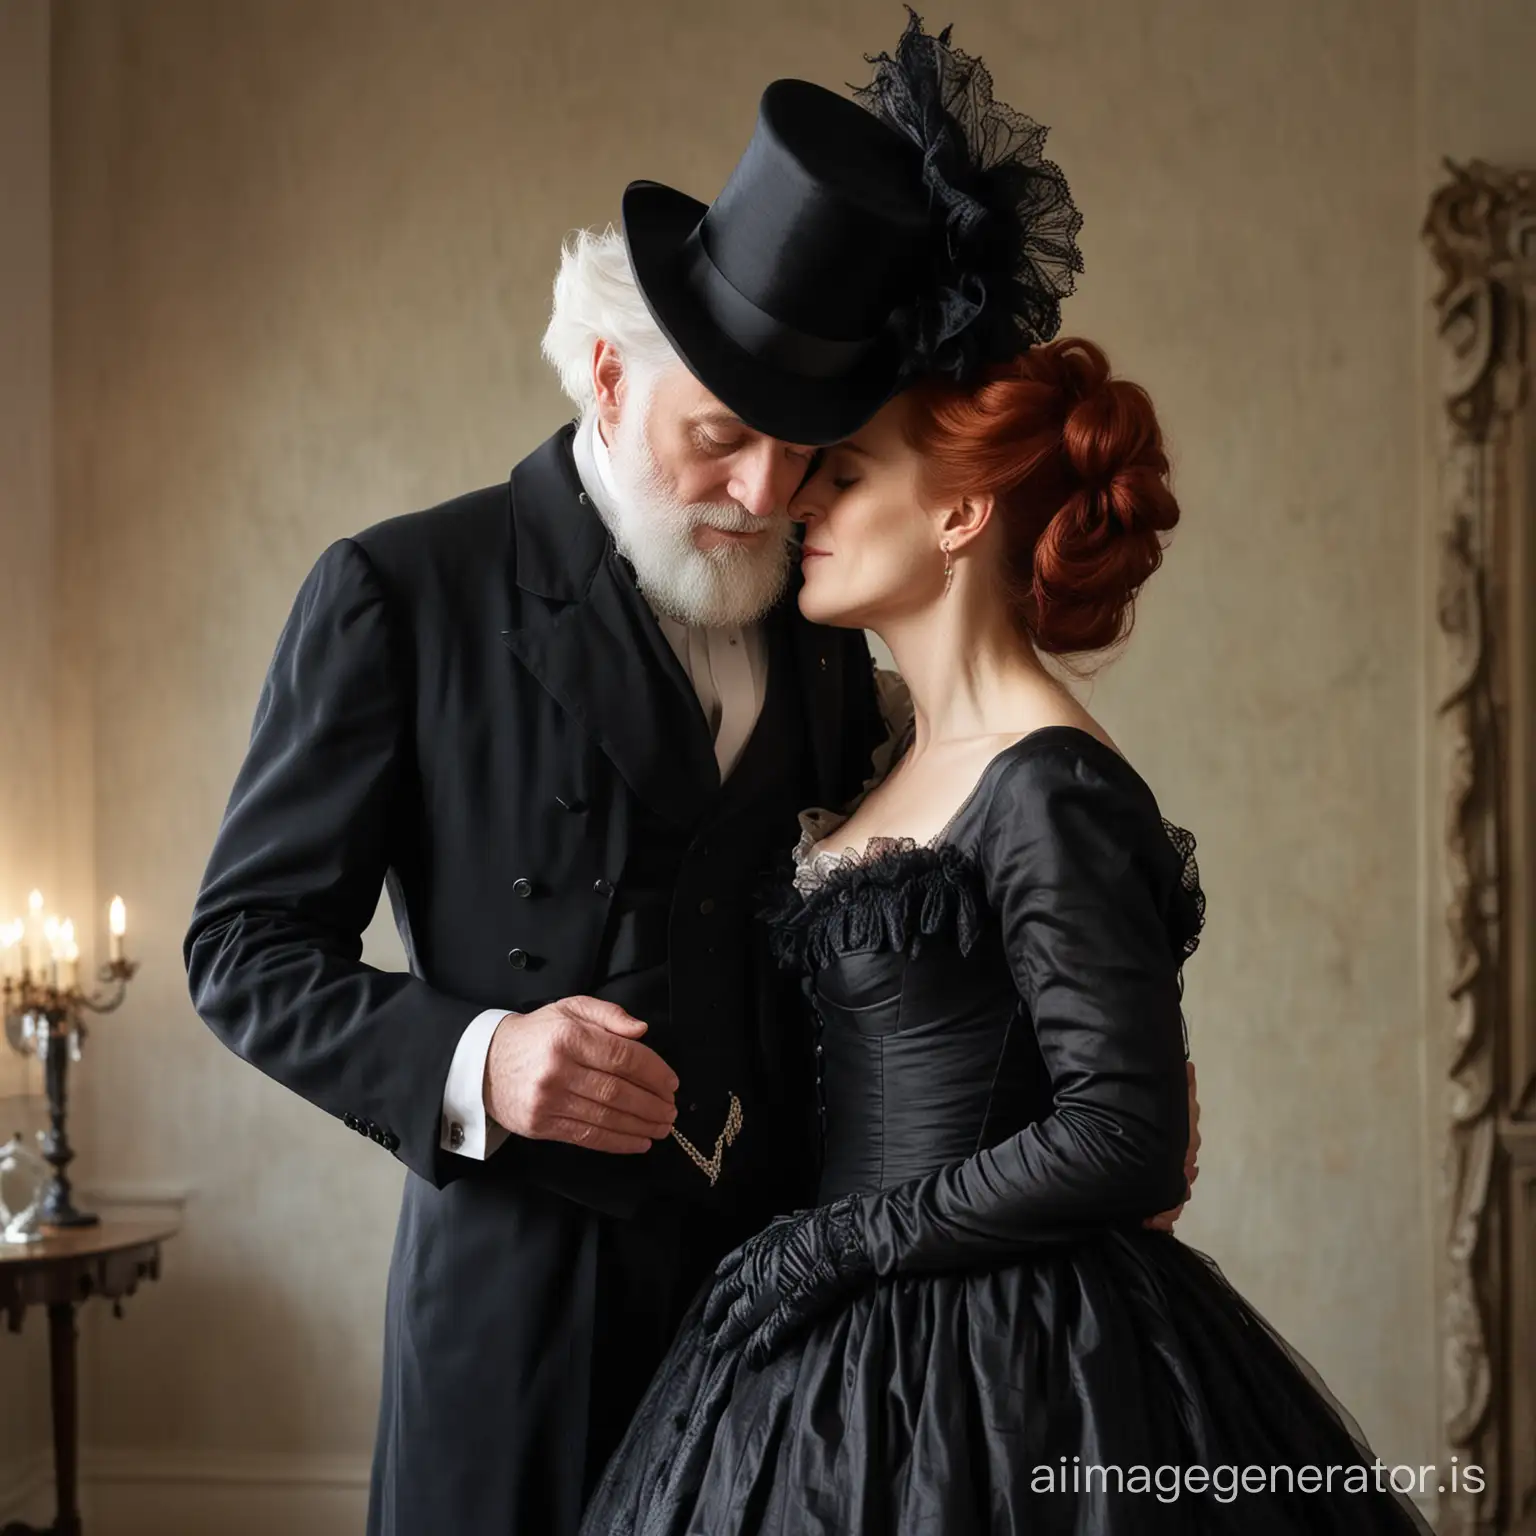 red hair Gillian Anderson wearing a black floor-length loose billowing 1860 Victorian crinoline dress and a frilly bonnet kissing an old man who seems to be her newlywed husband